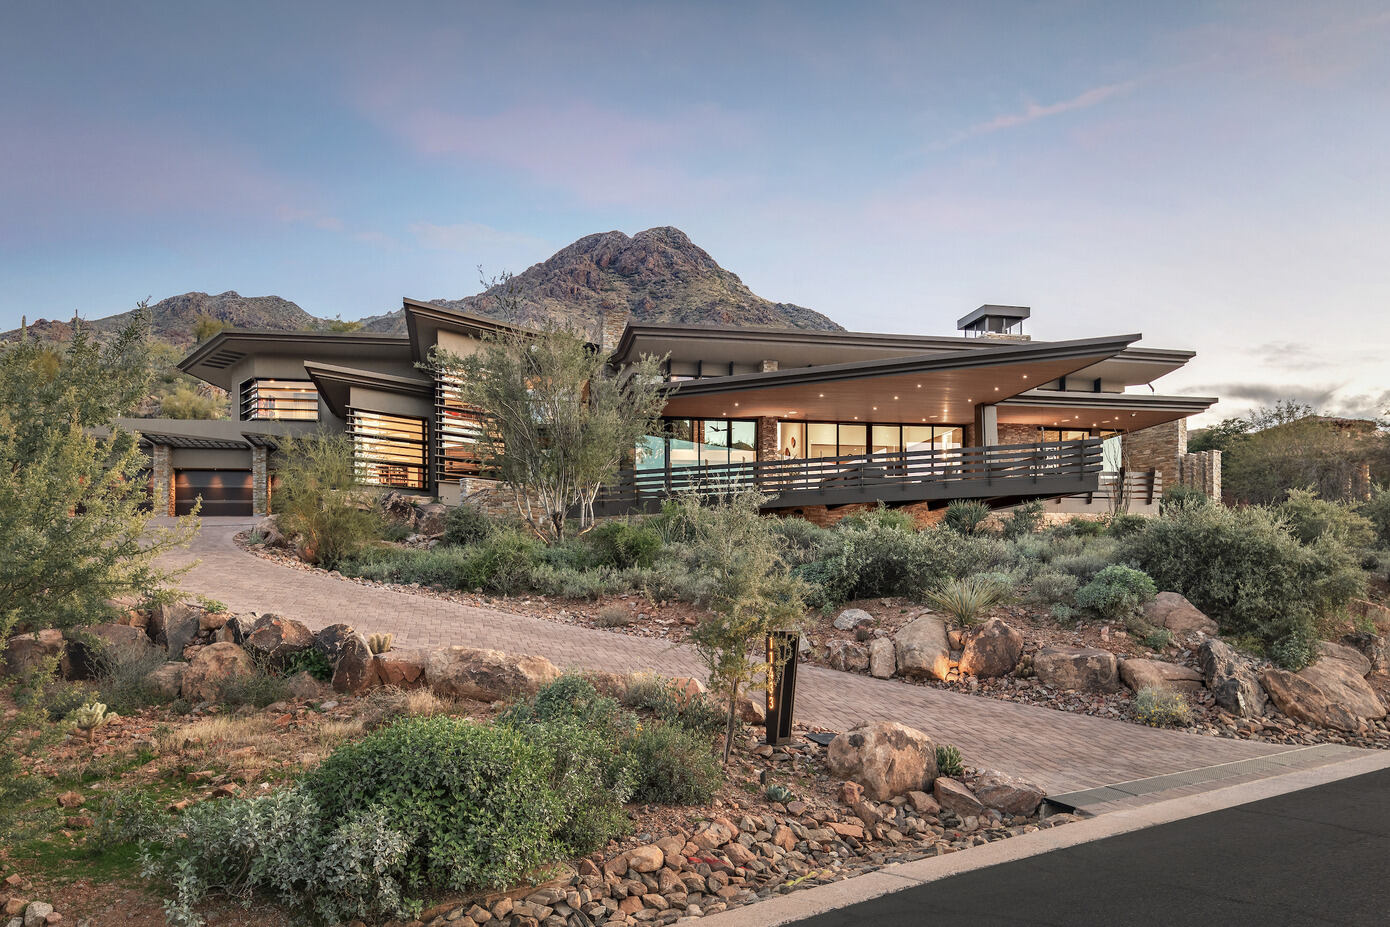 Troon Ridge Residence: A Contemporary, Earthy Home in the Sonoran Desert